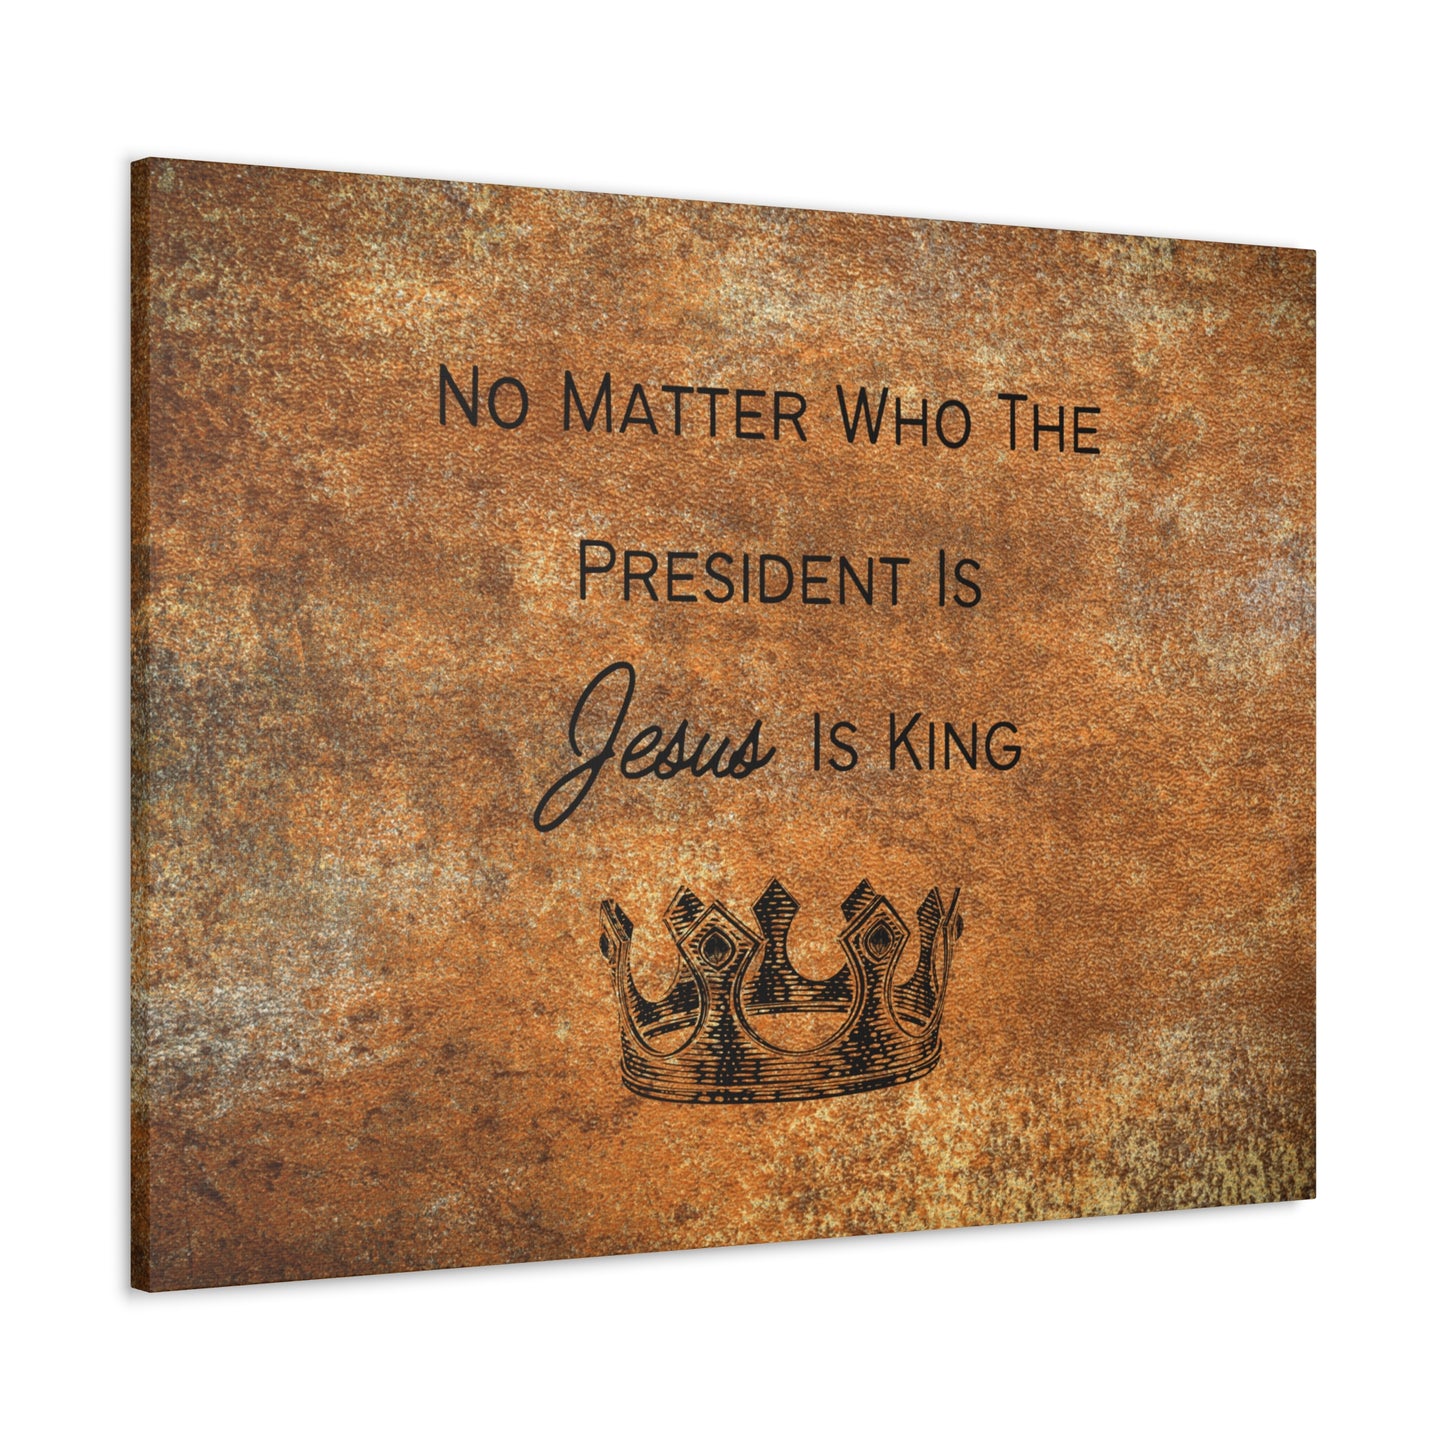 "No Matter Who's President, Jesus is King" statement wall art for spiritual inspiration.